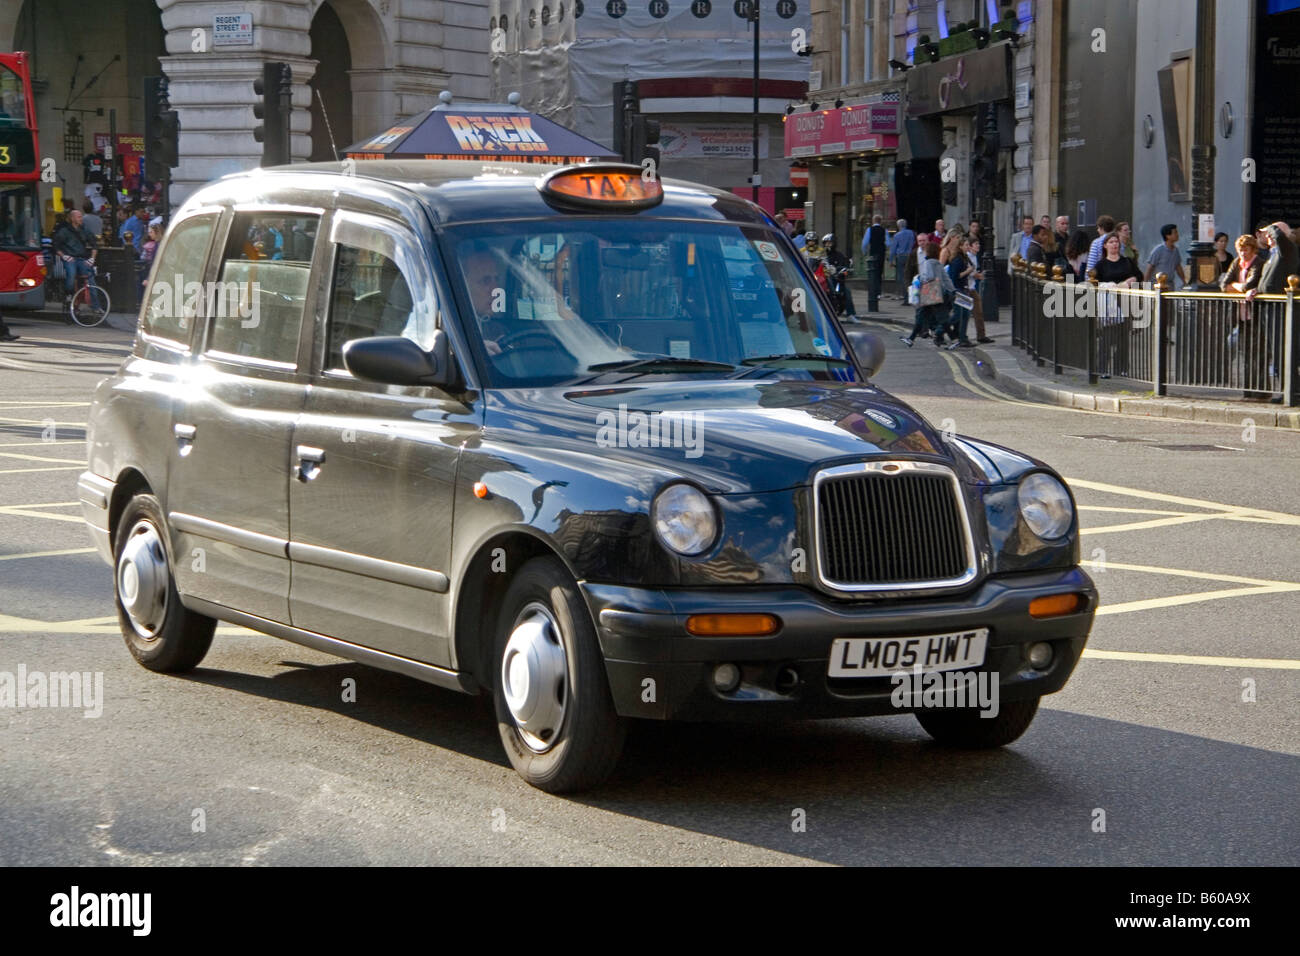 Hackney Taxi Taxi in der Stadt London England Stockfoto